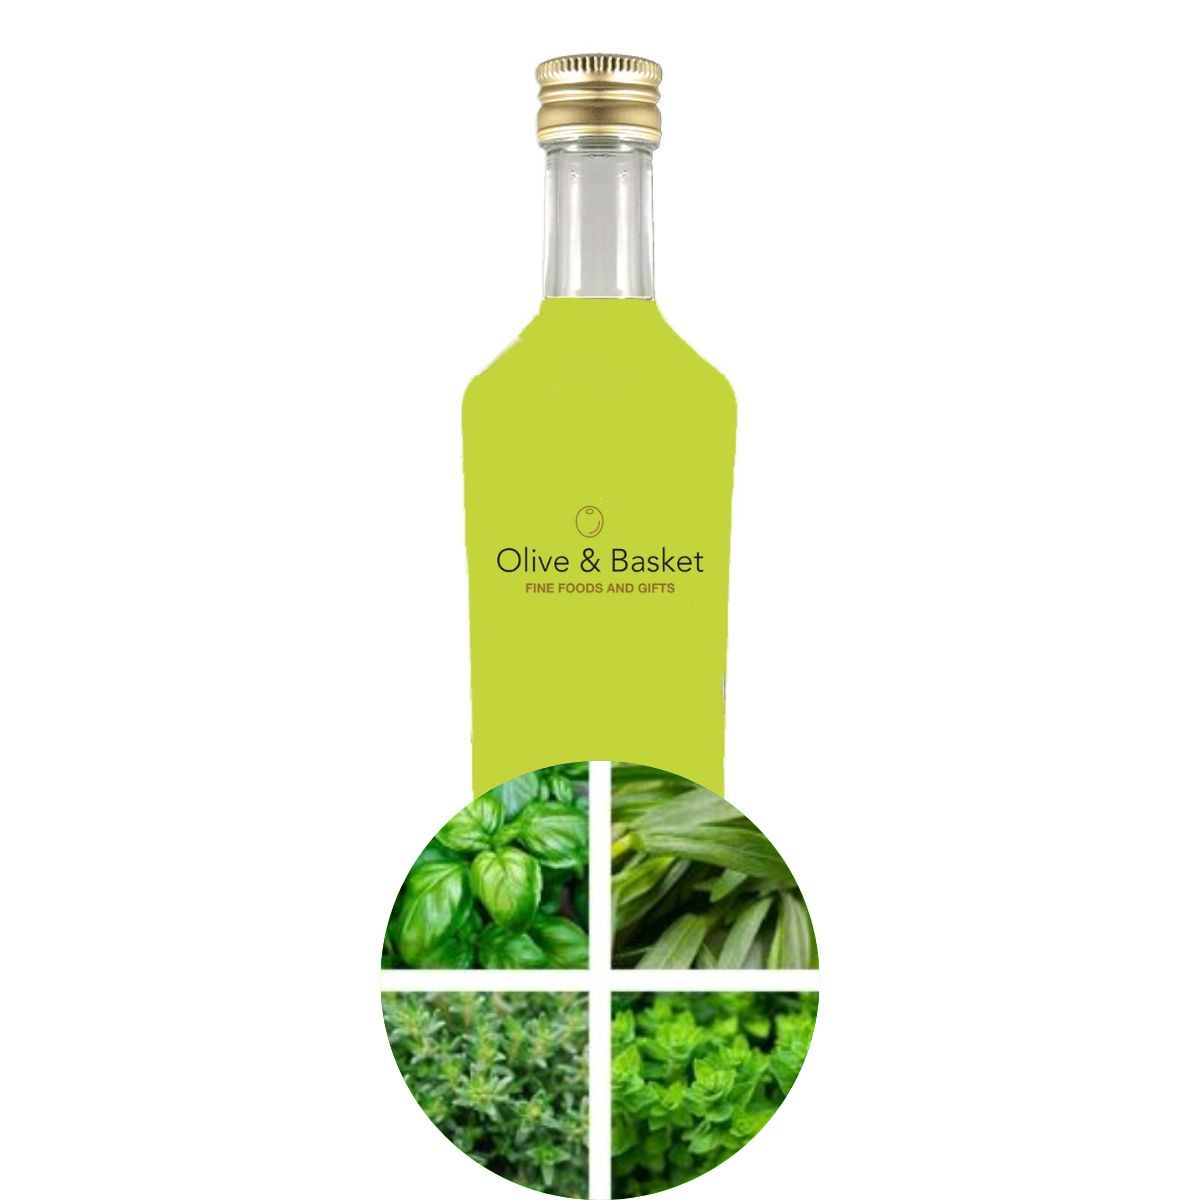 Tuscan Herb Olive Oil from Italy with flavors of basil, oregano, tarragon, and thyme, galantino producer